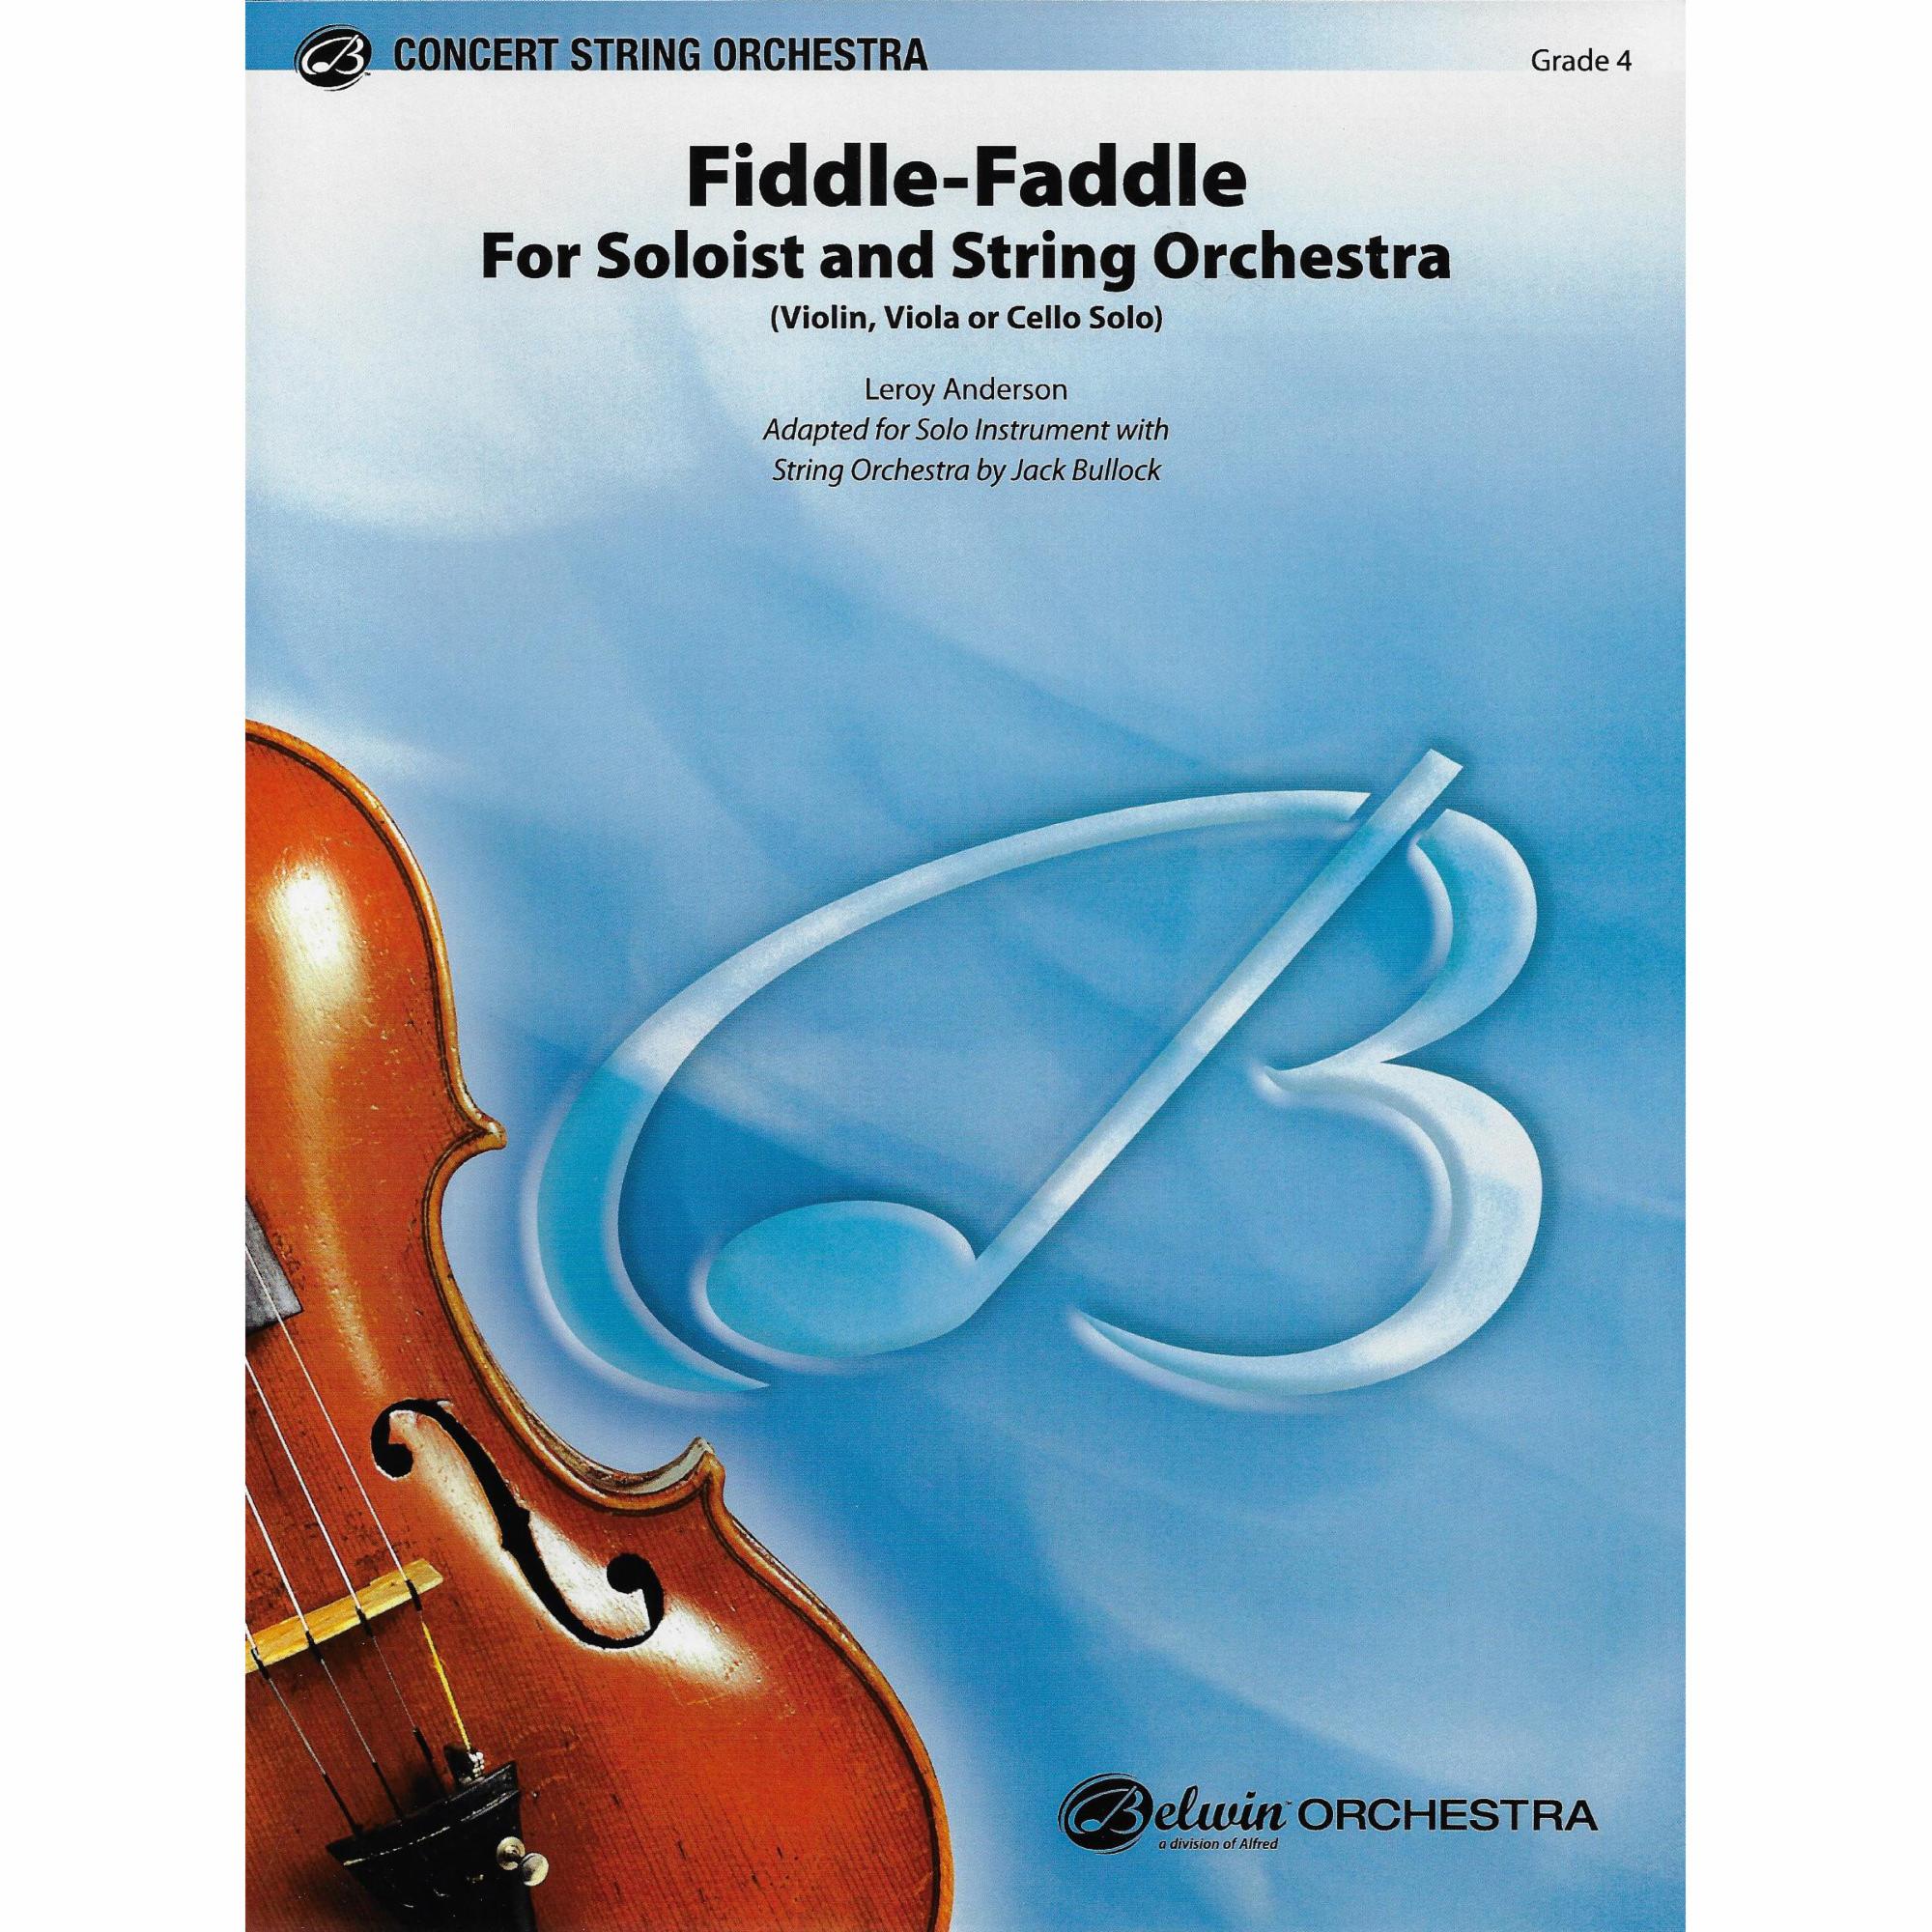 Fiddle-Faddle for Soloist and String Orchestra